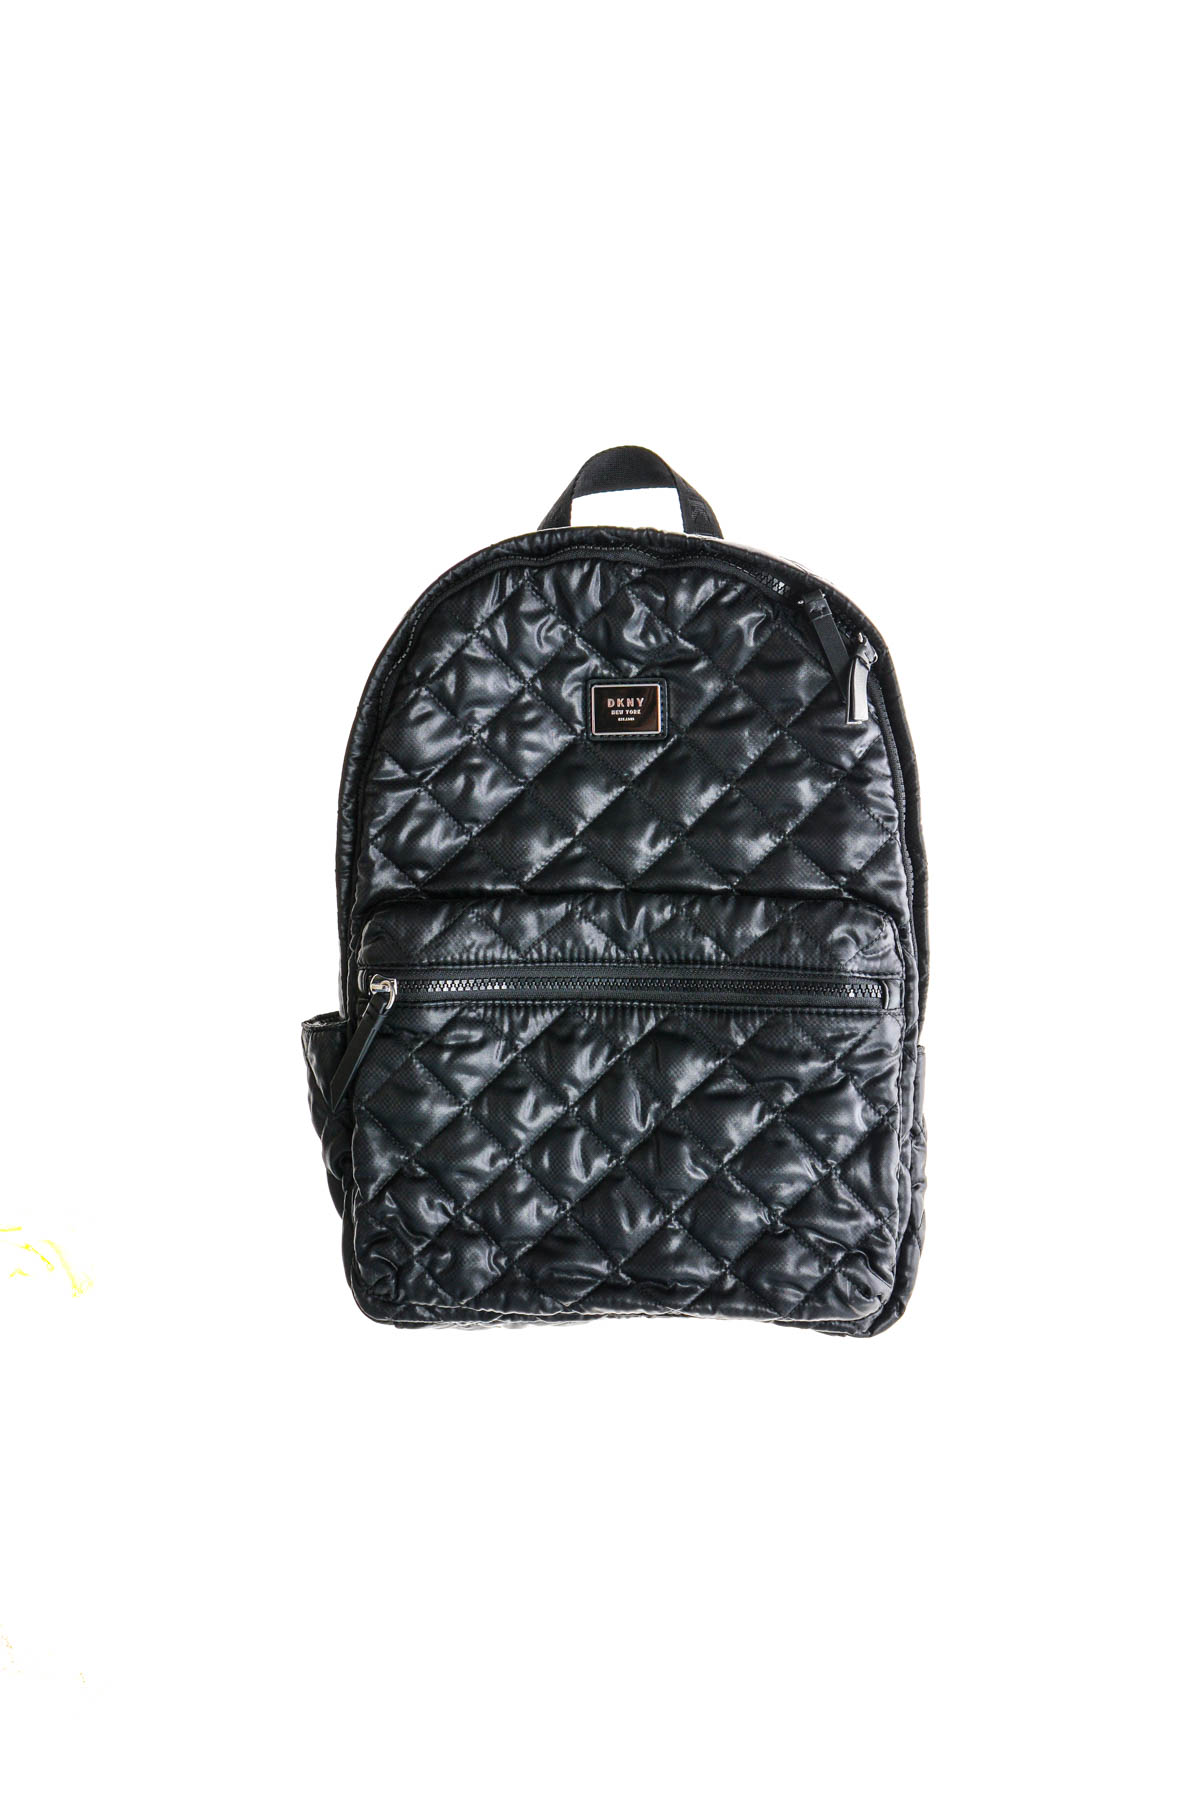 Woman's backpack - DKNY - 0